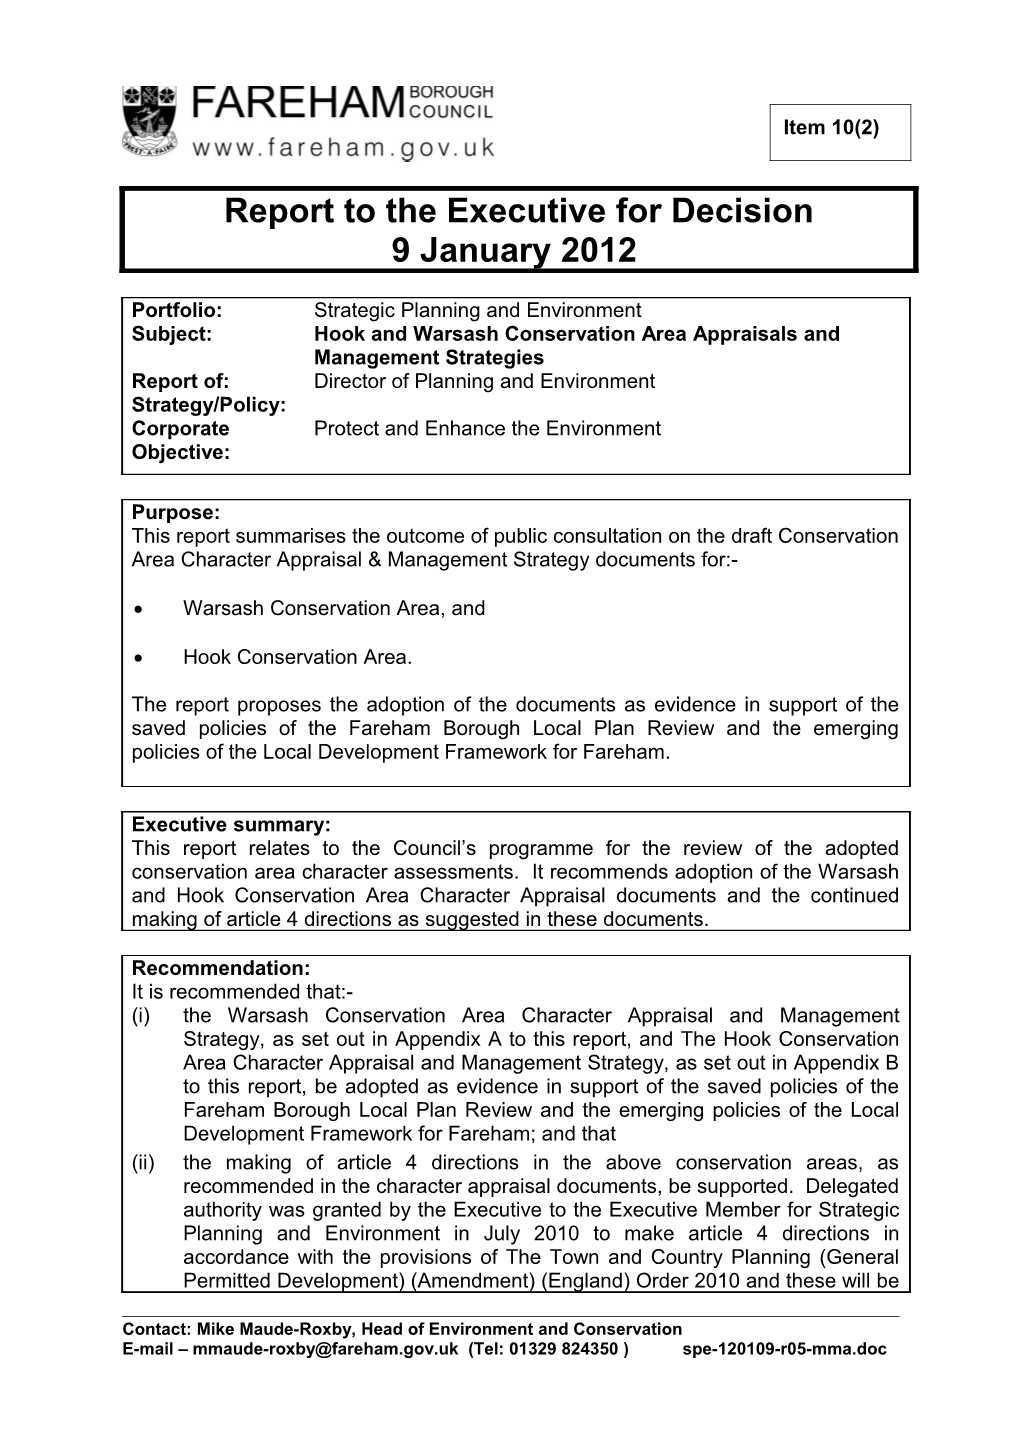 Report to the Executive for Decision - (Head of Environment and Conservation) -09 January 2012